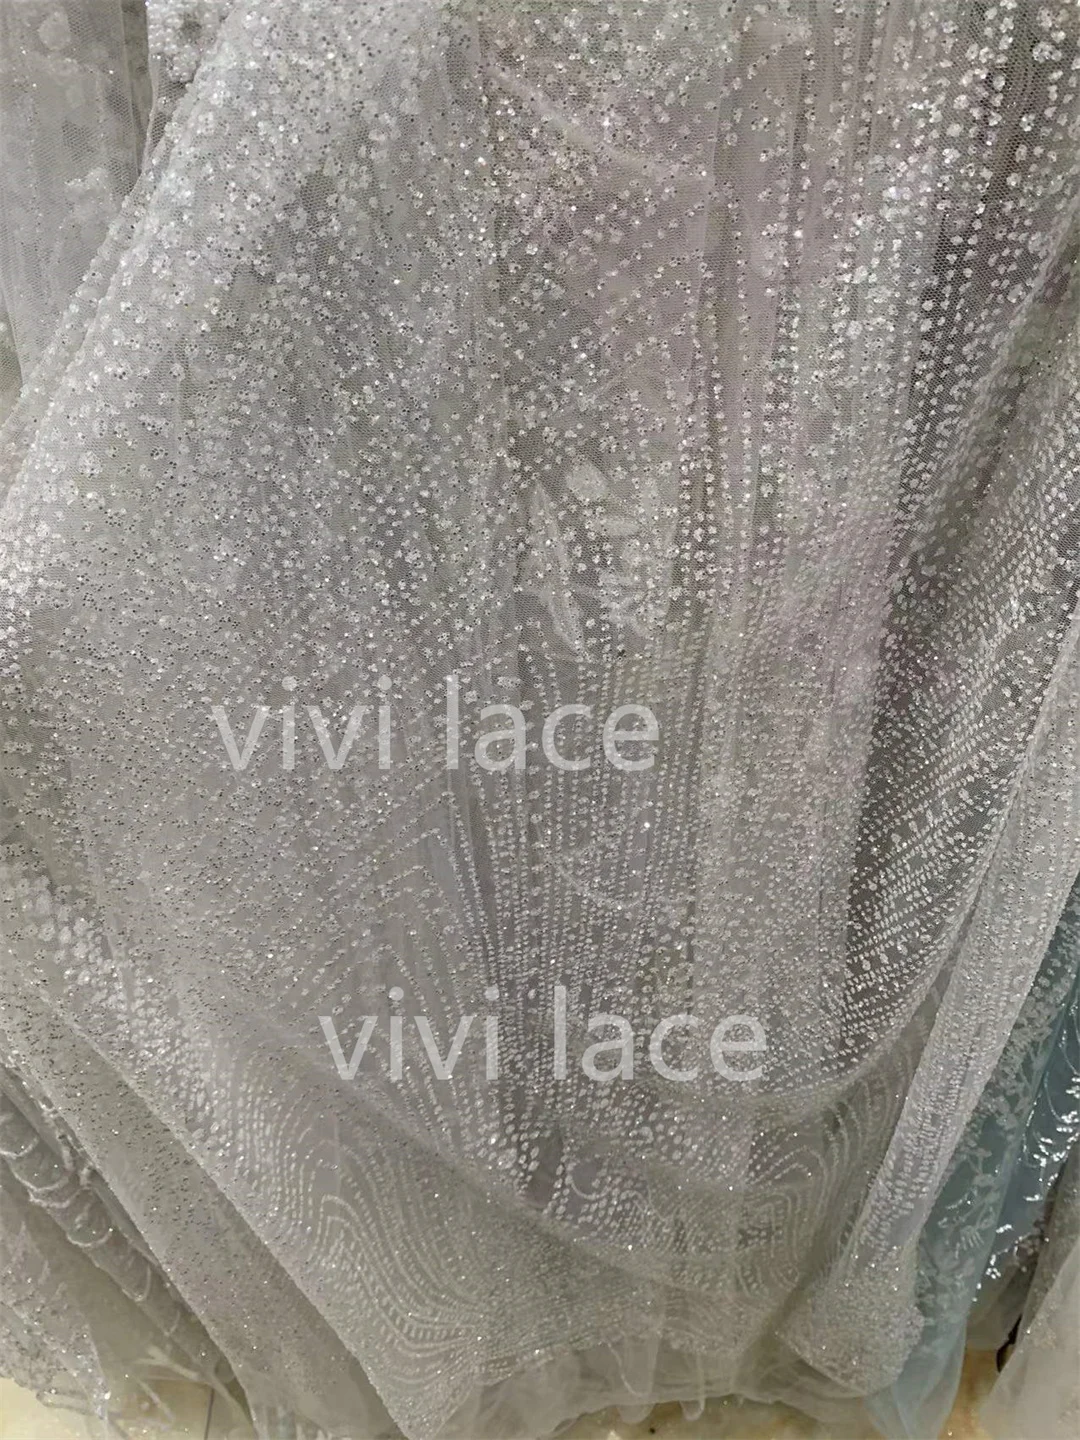 

5 Yards Wedding Couture Crystal White Bling Glitter Glued Tulle Lace African Fabric For Sawing Party Dress/Occasion